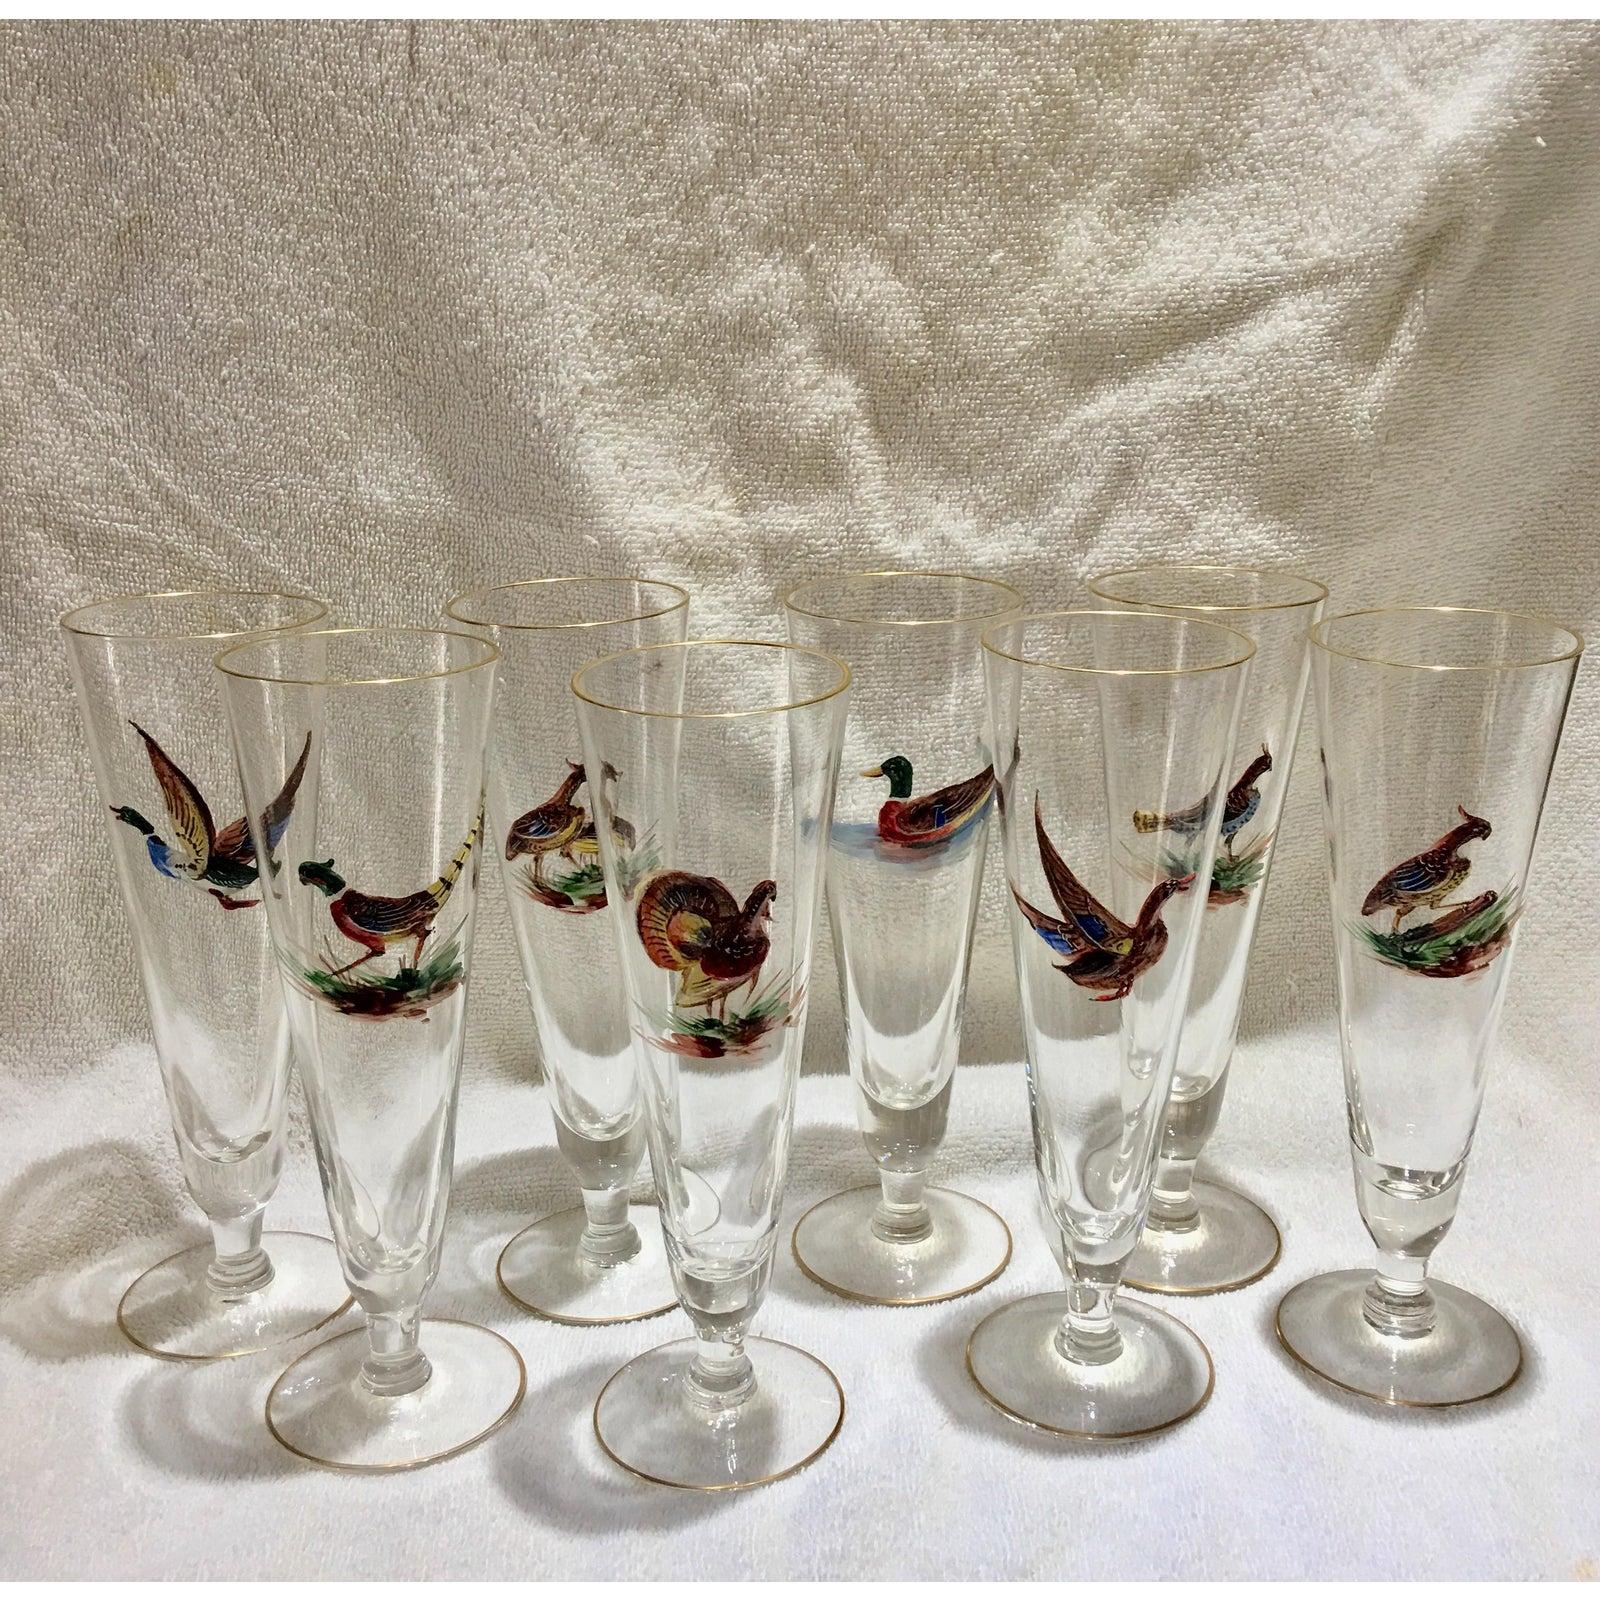 Rare set of 8 European pilsner or champagne flutes with enameled birds with gold rims on the top and bottom. The enameling extends out from the glass. These fabulous glasses date from 1920-1930. These glasses have been packed away and were never